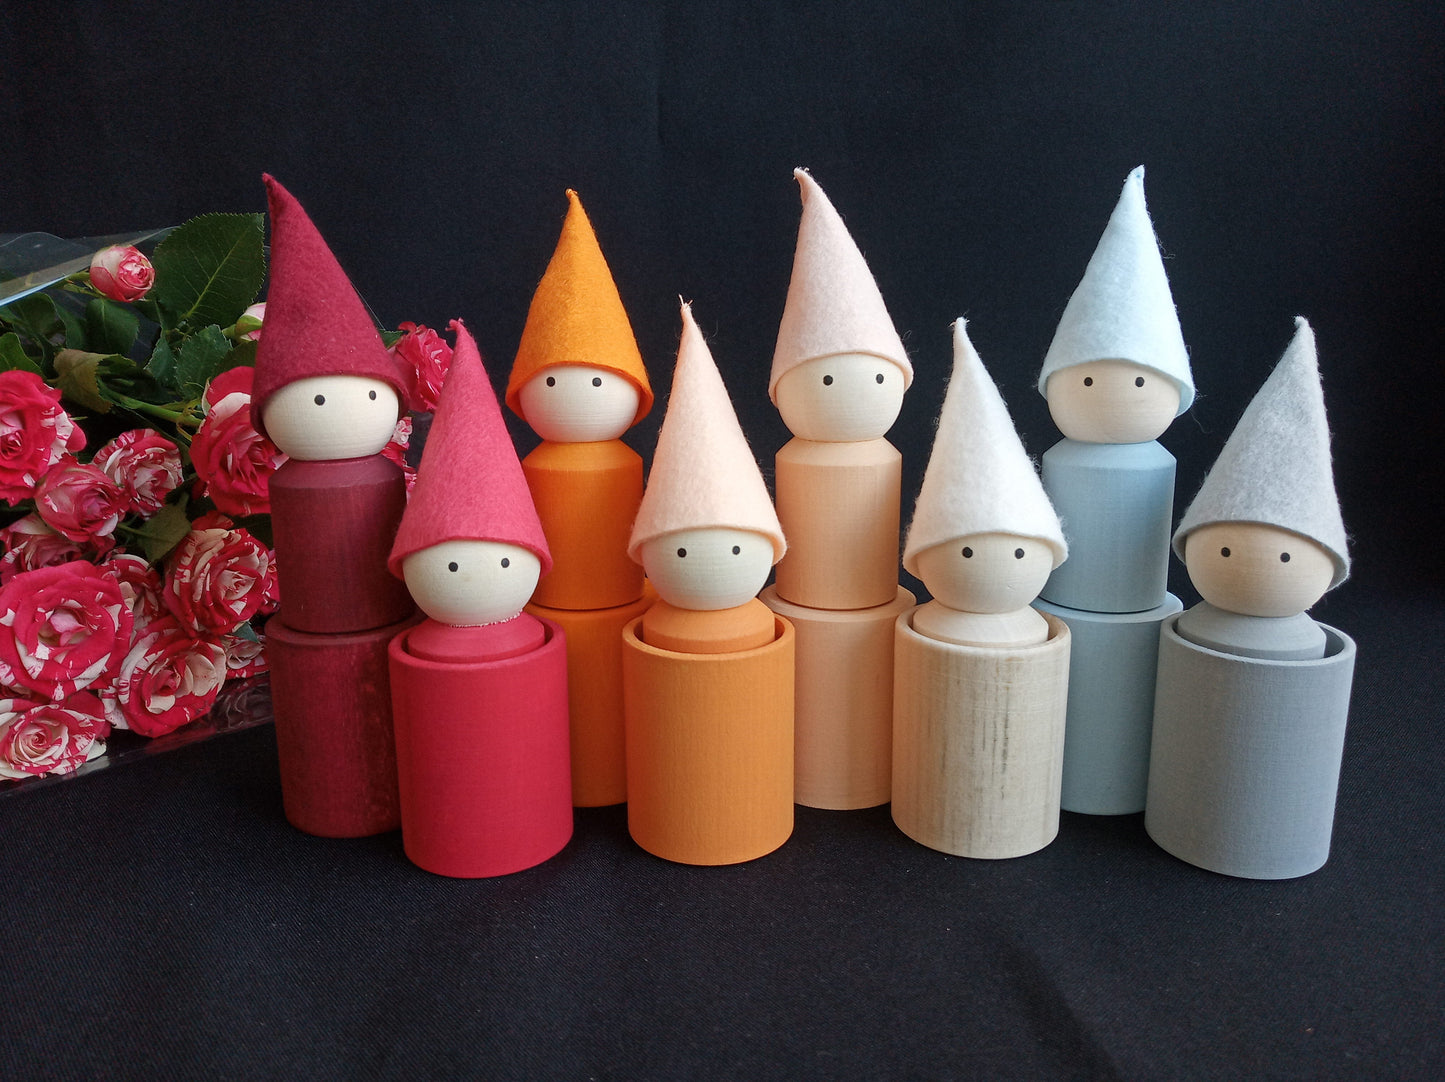 Wooden Peg Dolls and Cups